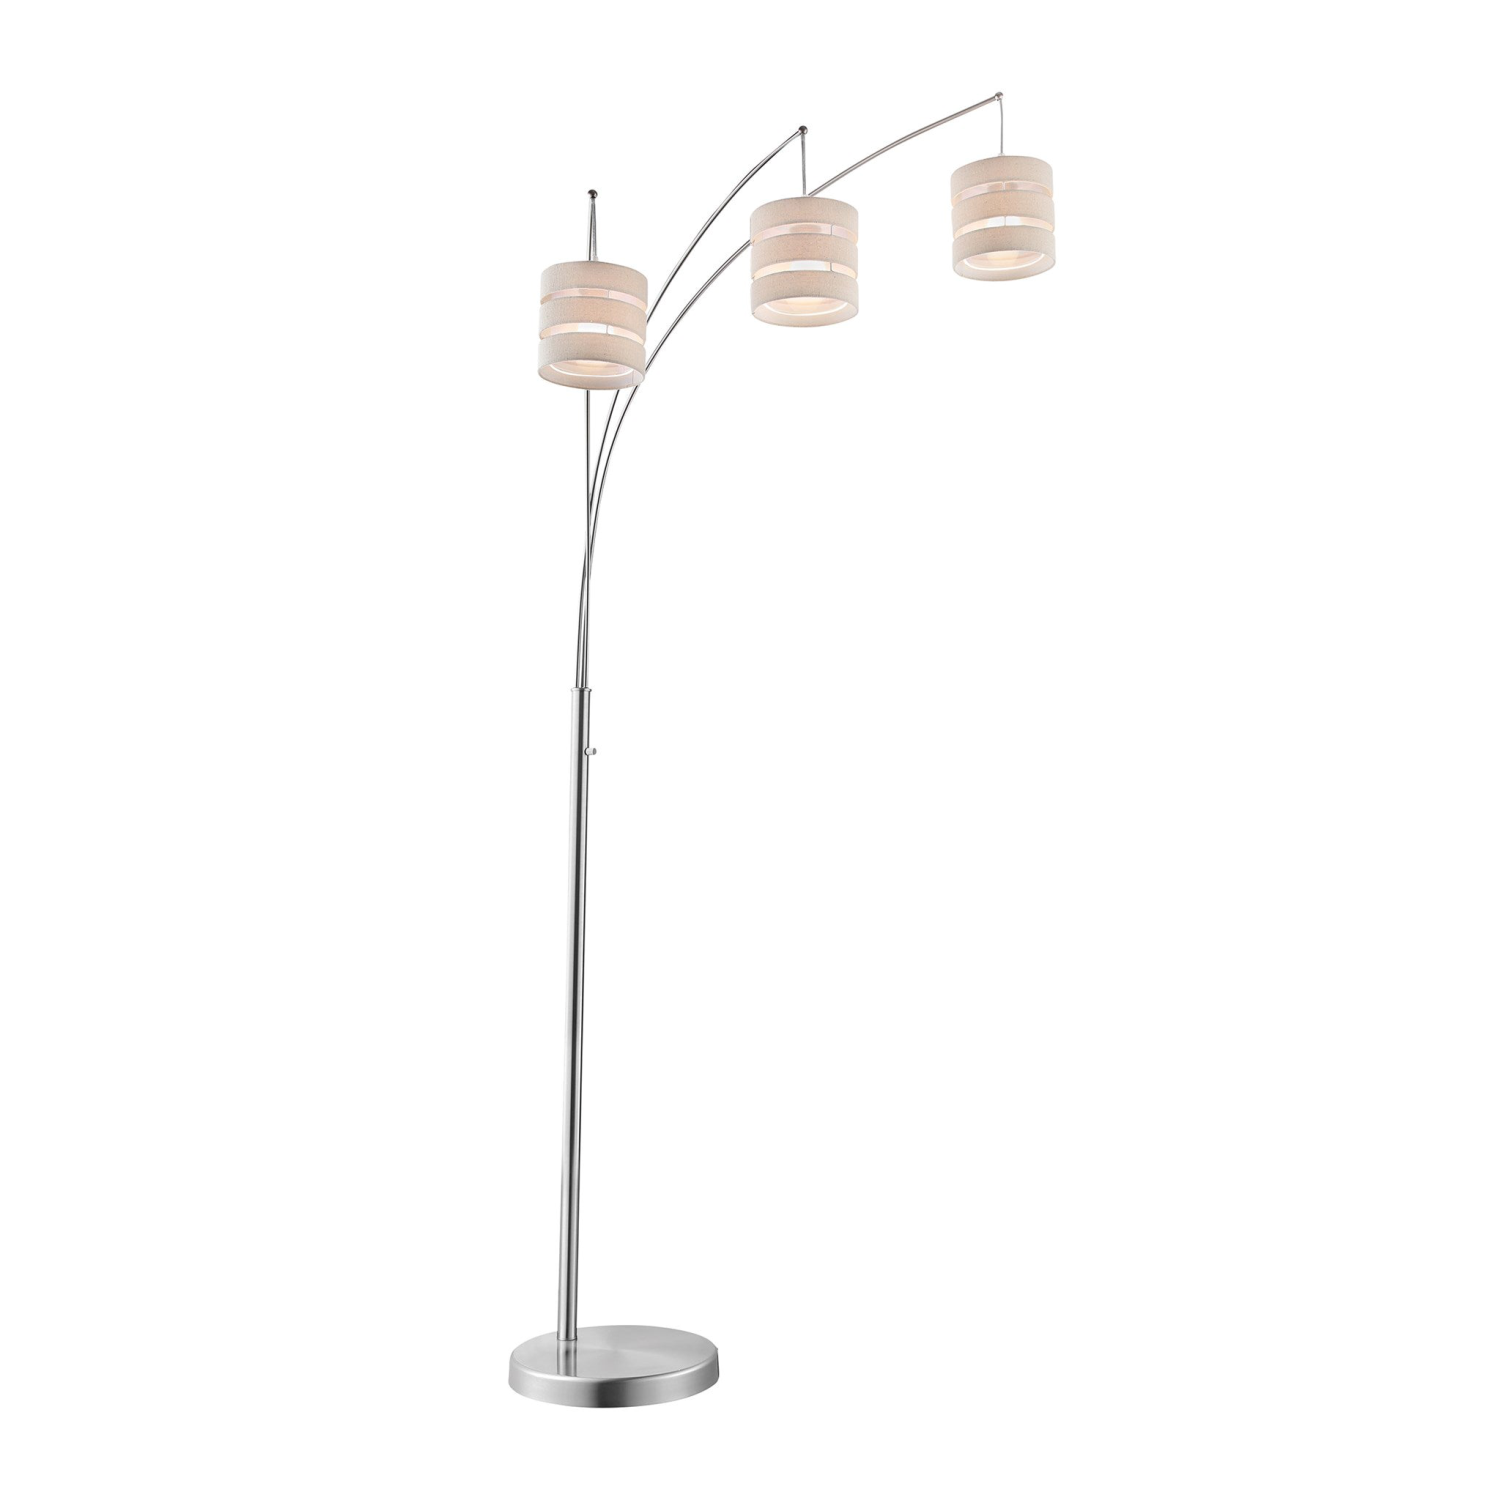 Falan Arc Floor Lamp Picture with White Background